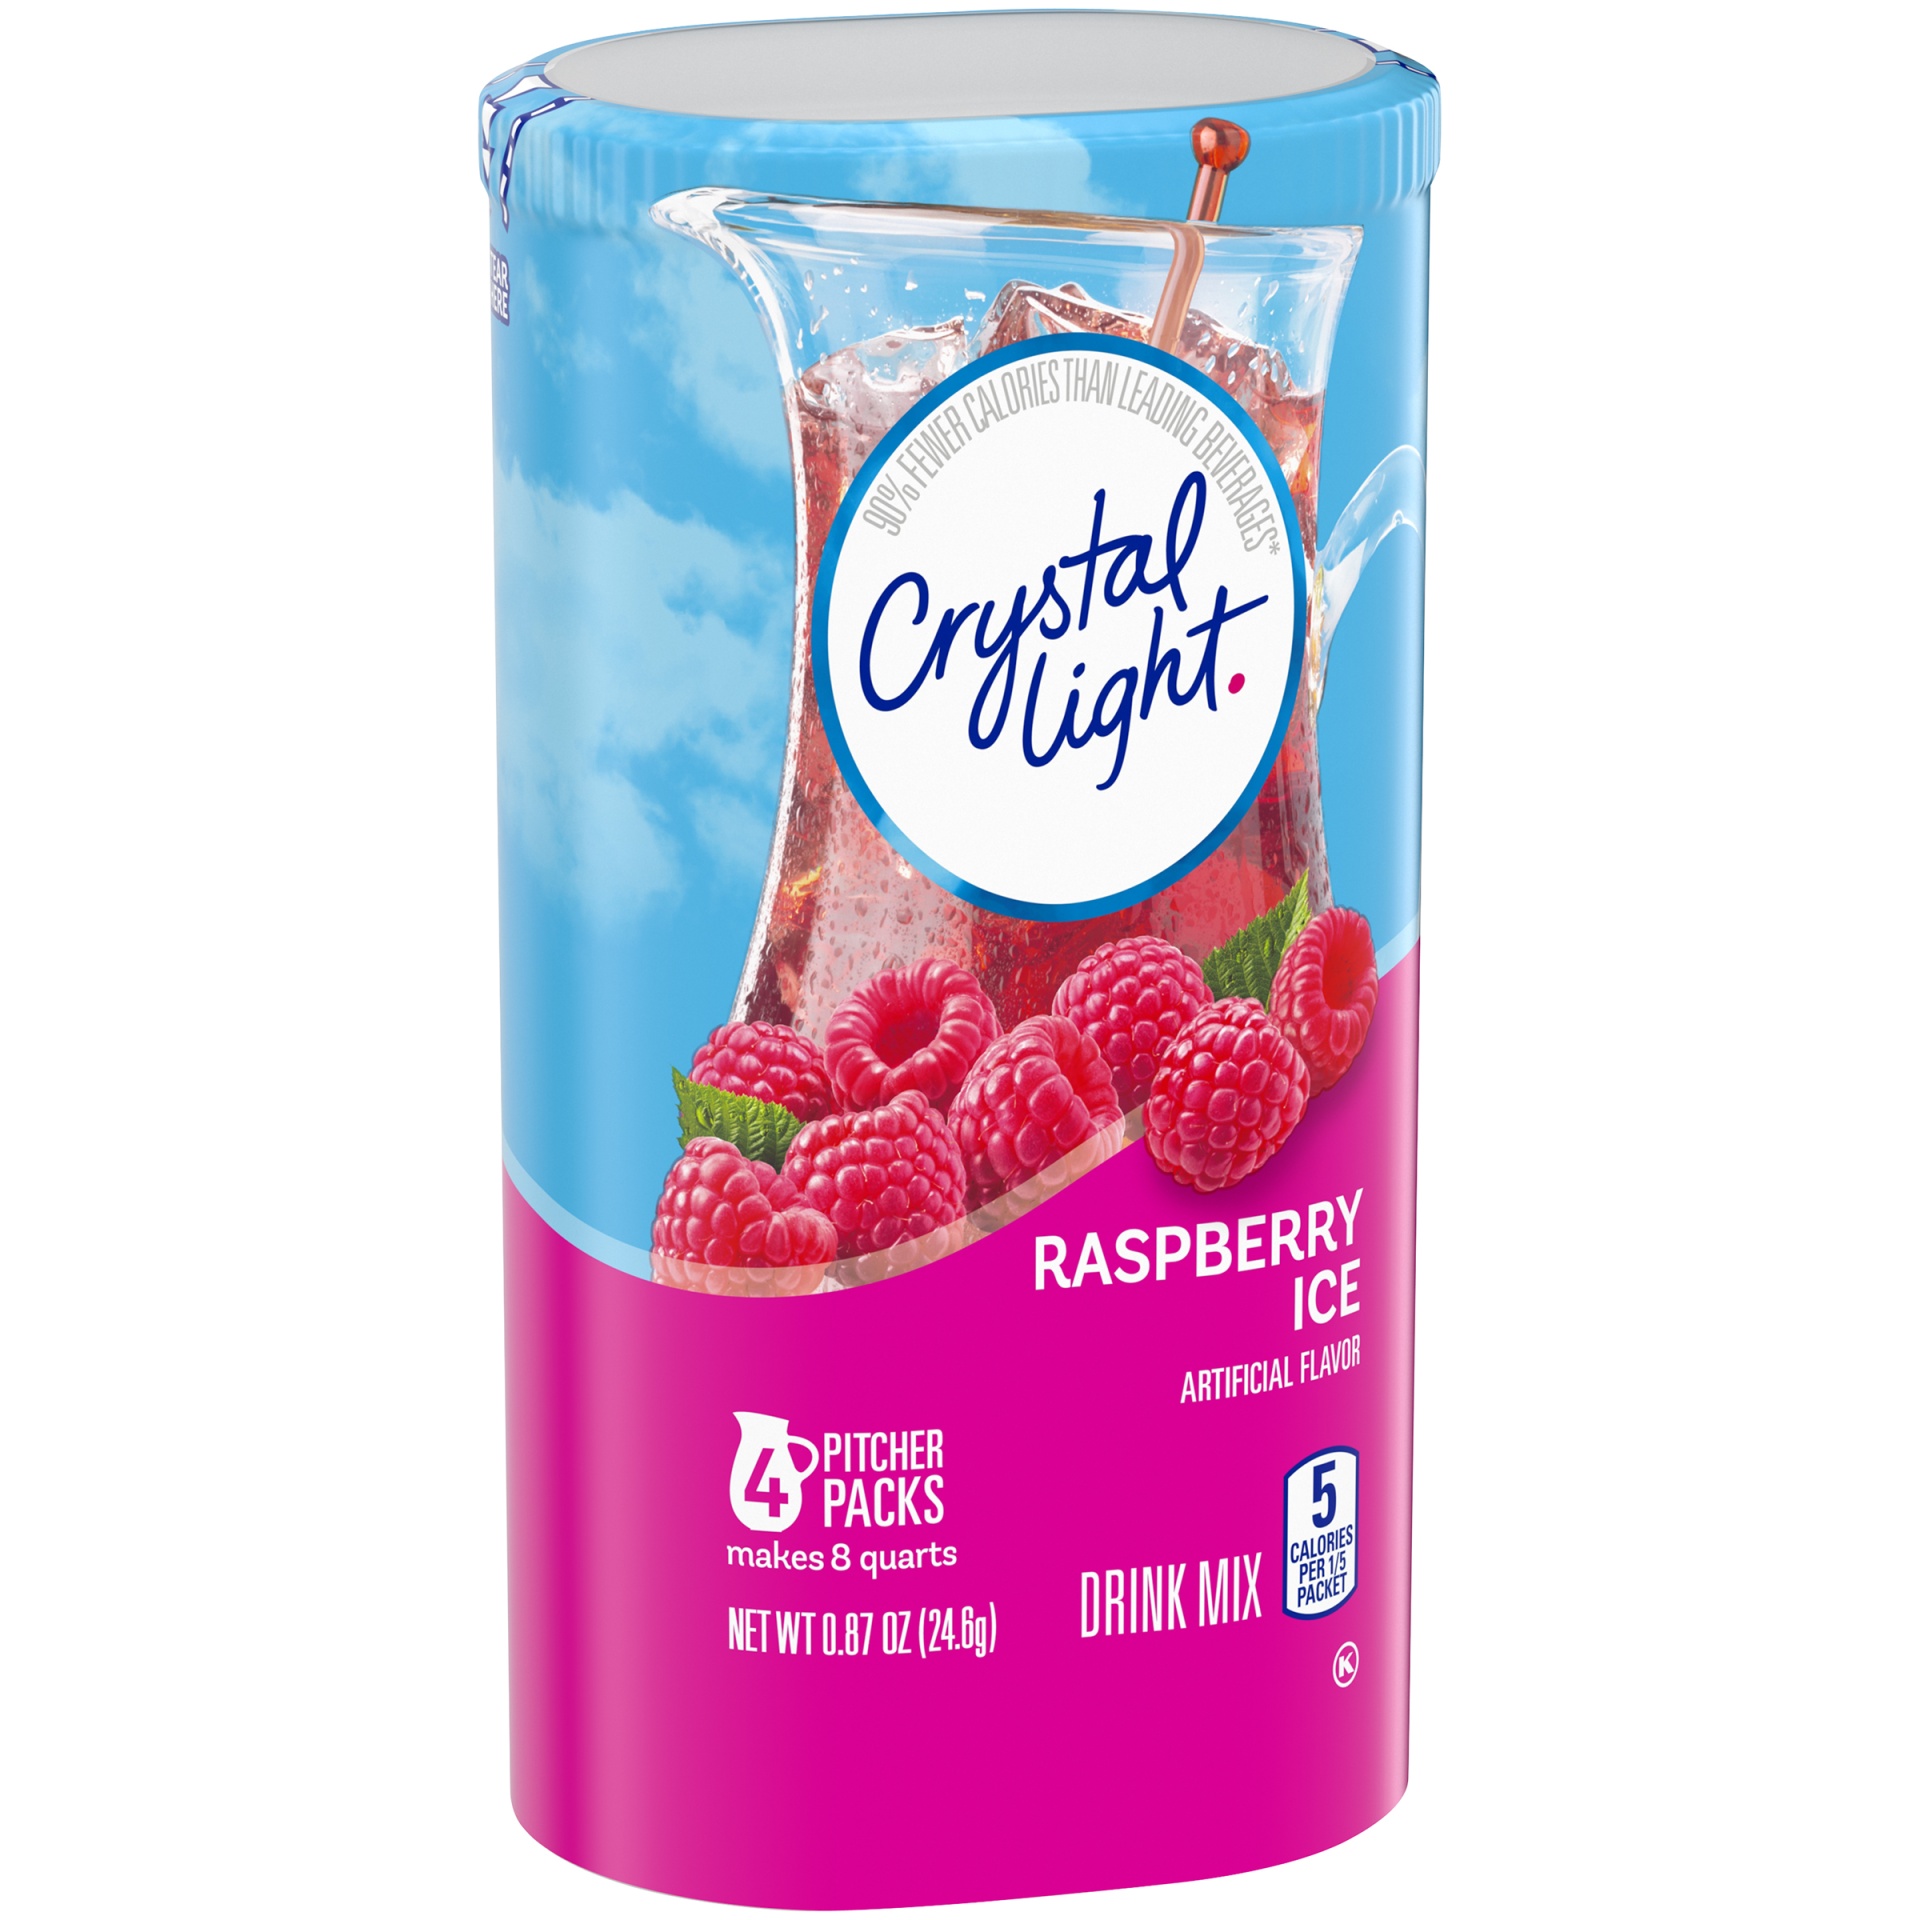 slide 4 of 8, Crystal Light Raspberry Ice Artificially Flavored Powdered Drink Mix Pitcher, 0.87 oz